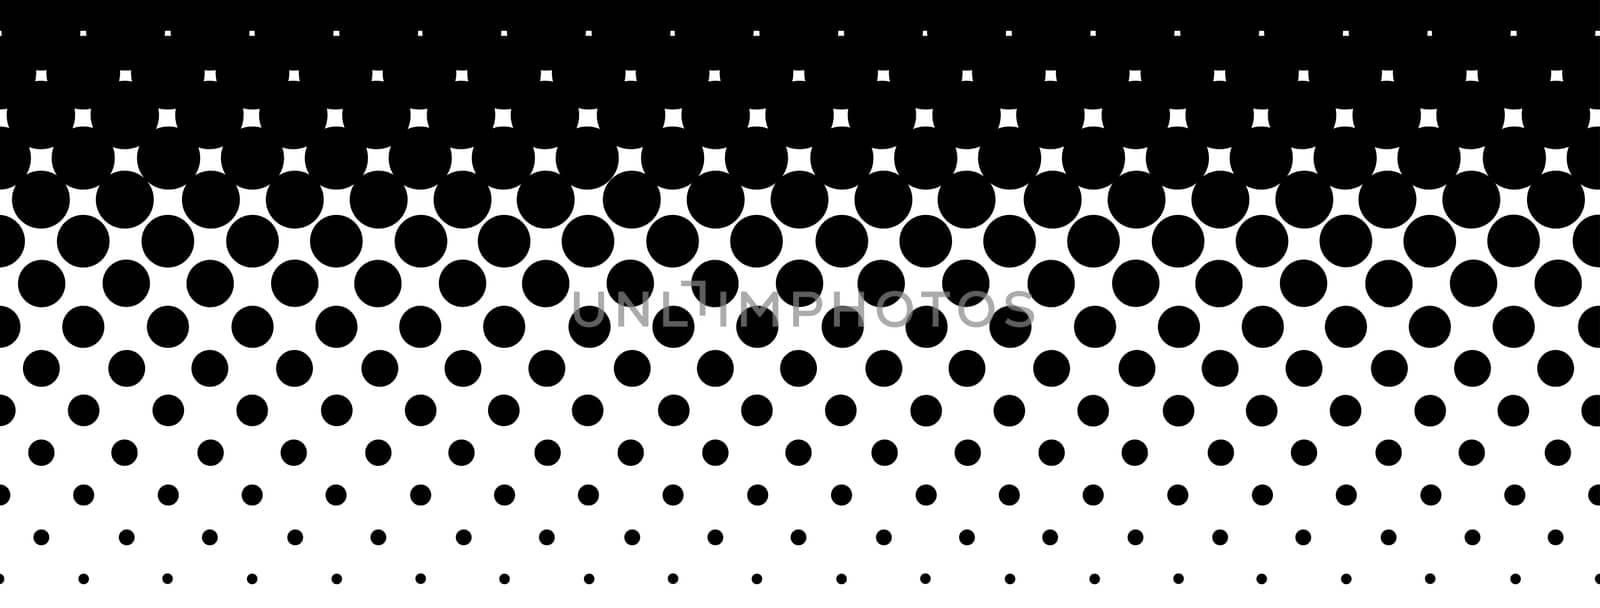 An image with white dots set against a black background.